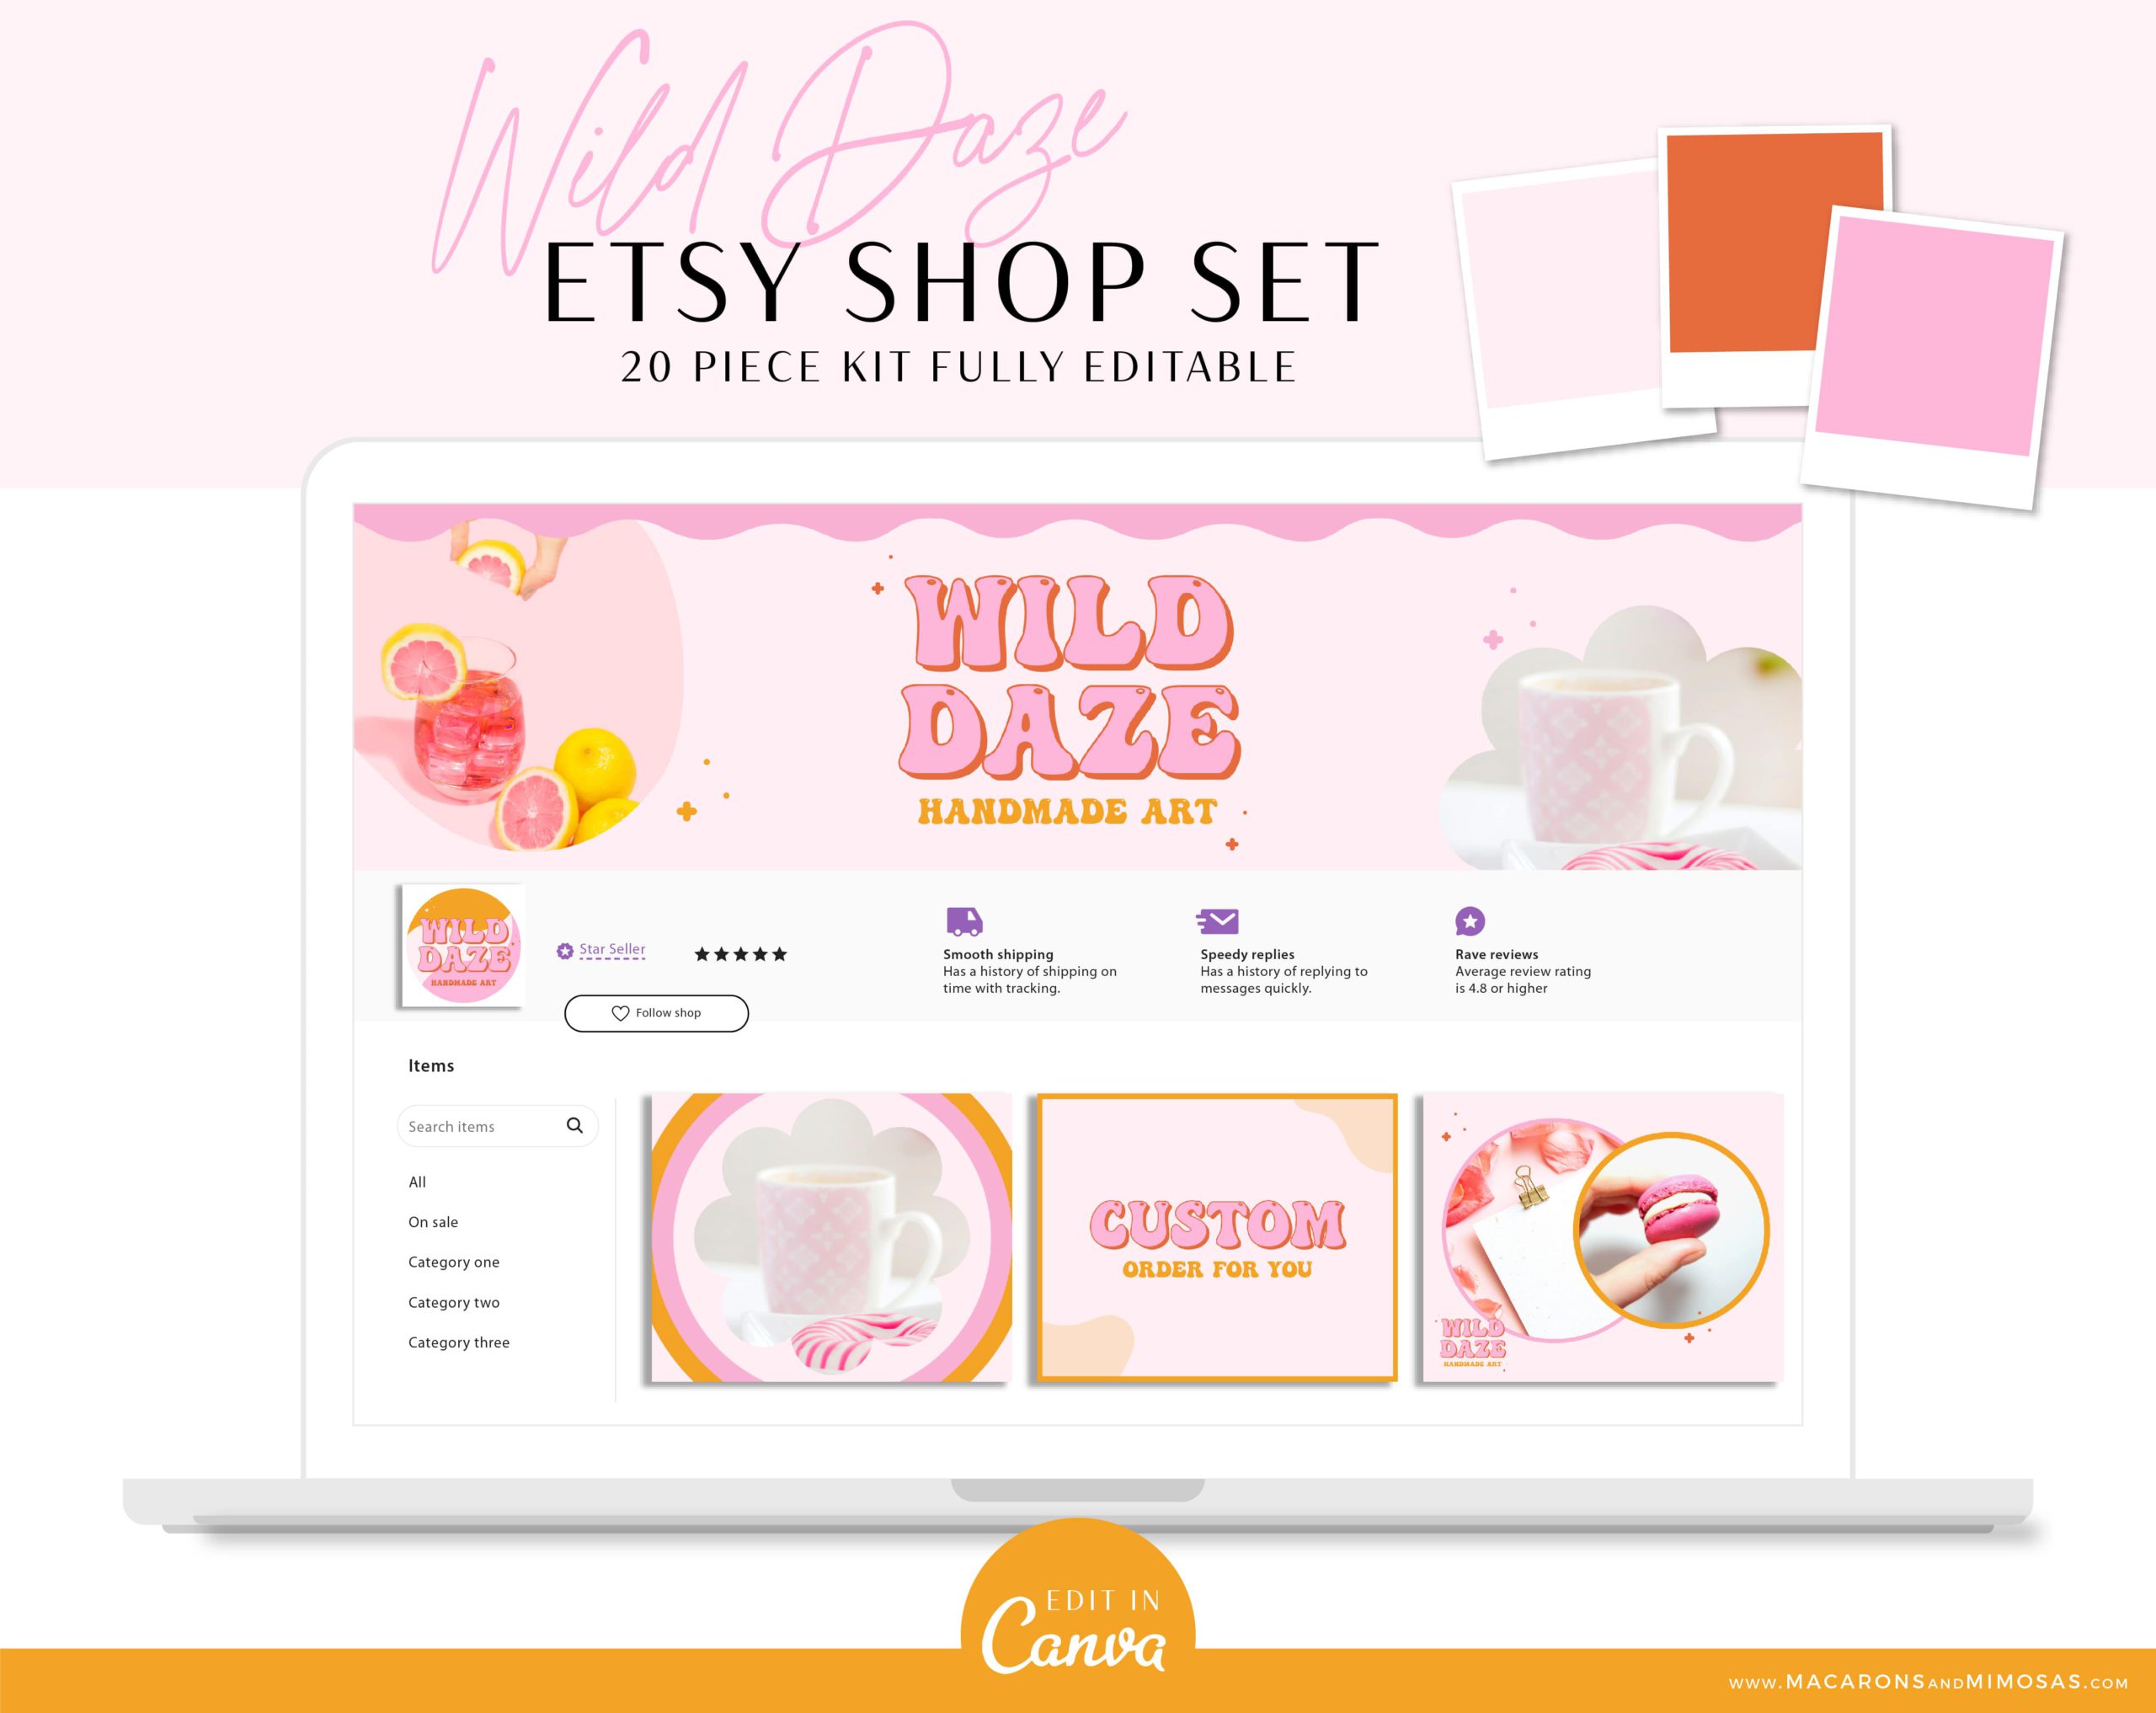 Bright Retro Etsy Banner Set, Brand your Etsy Shop Business with Boho Logos and Branding Kit, Fun Retro Etsy Shop Kit, Etsy Templates